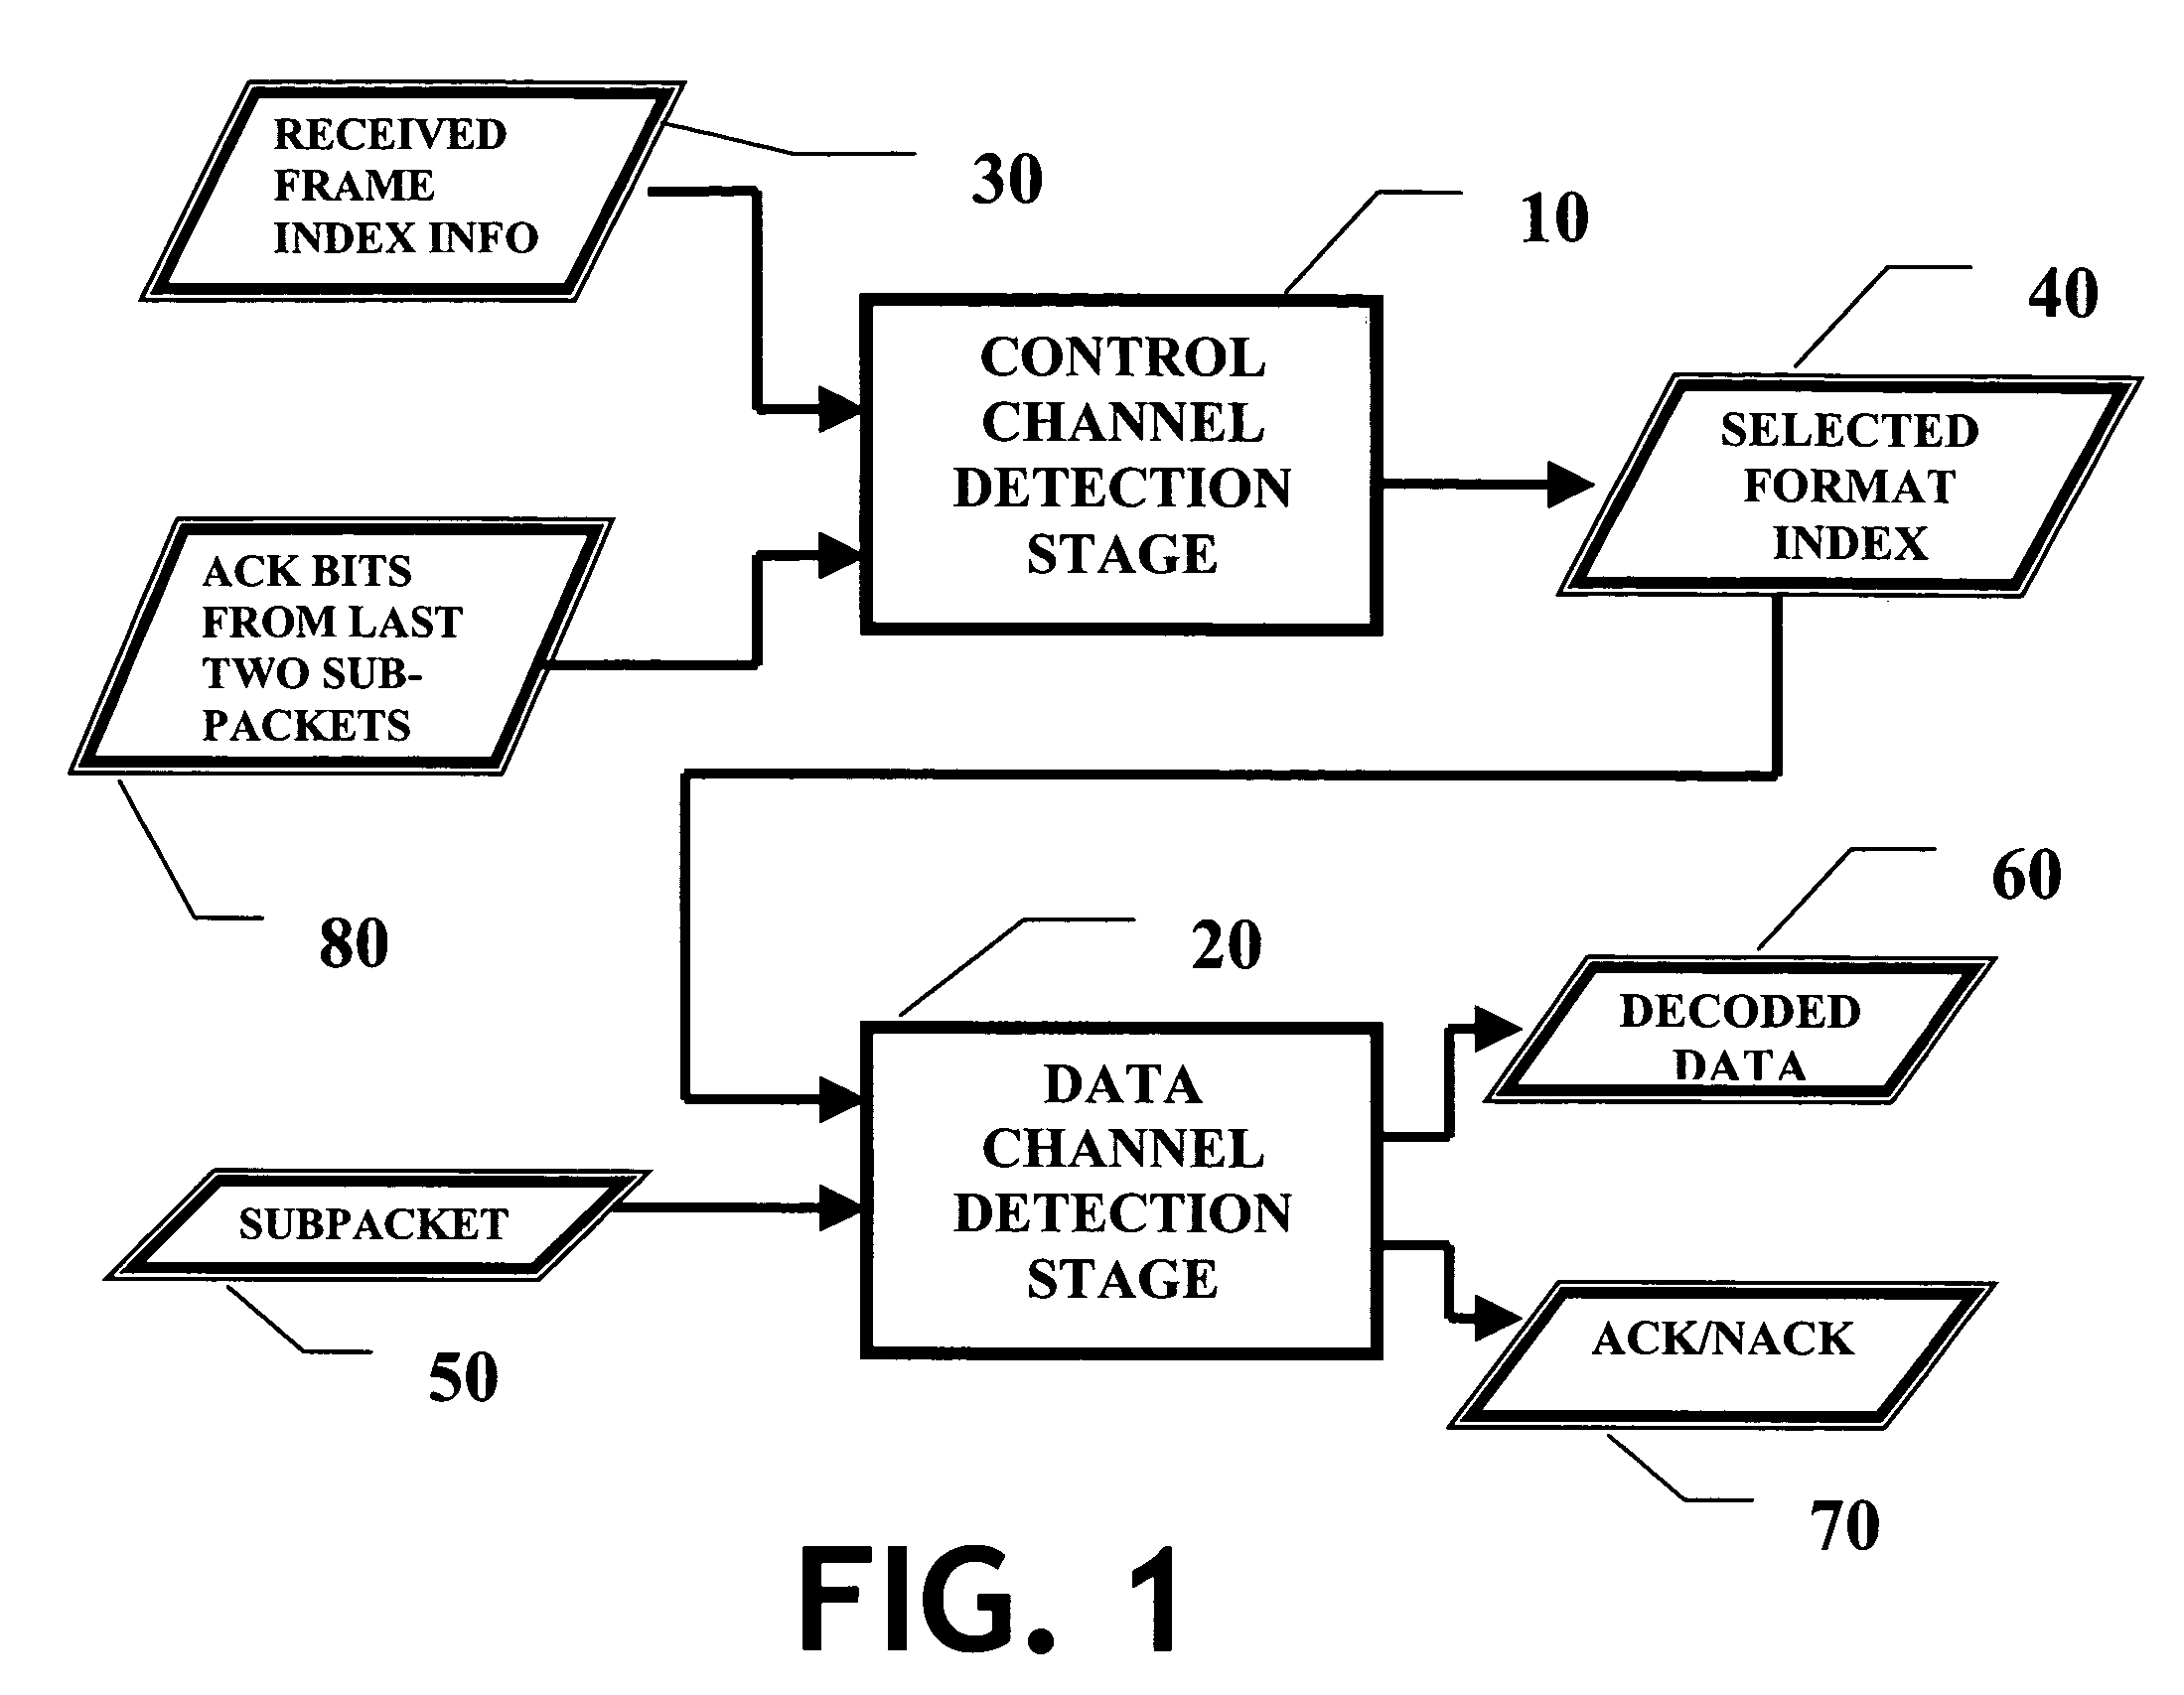 Reception method for packetized information with automatic repeat request